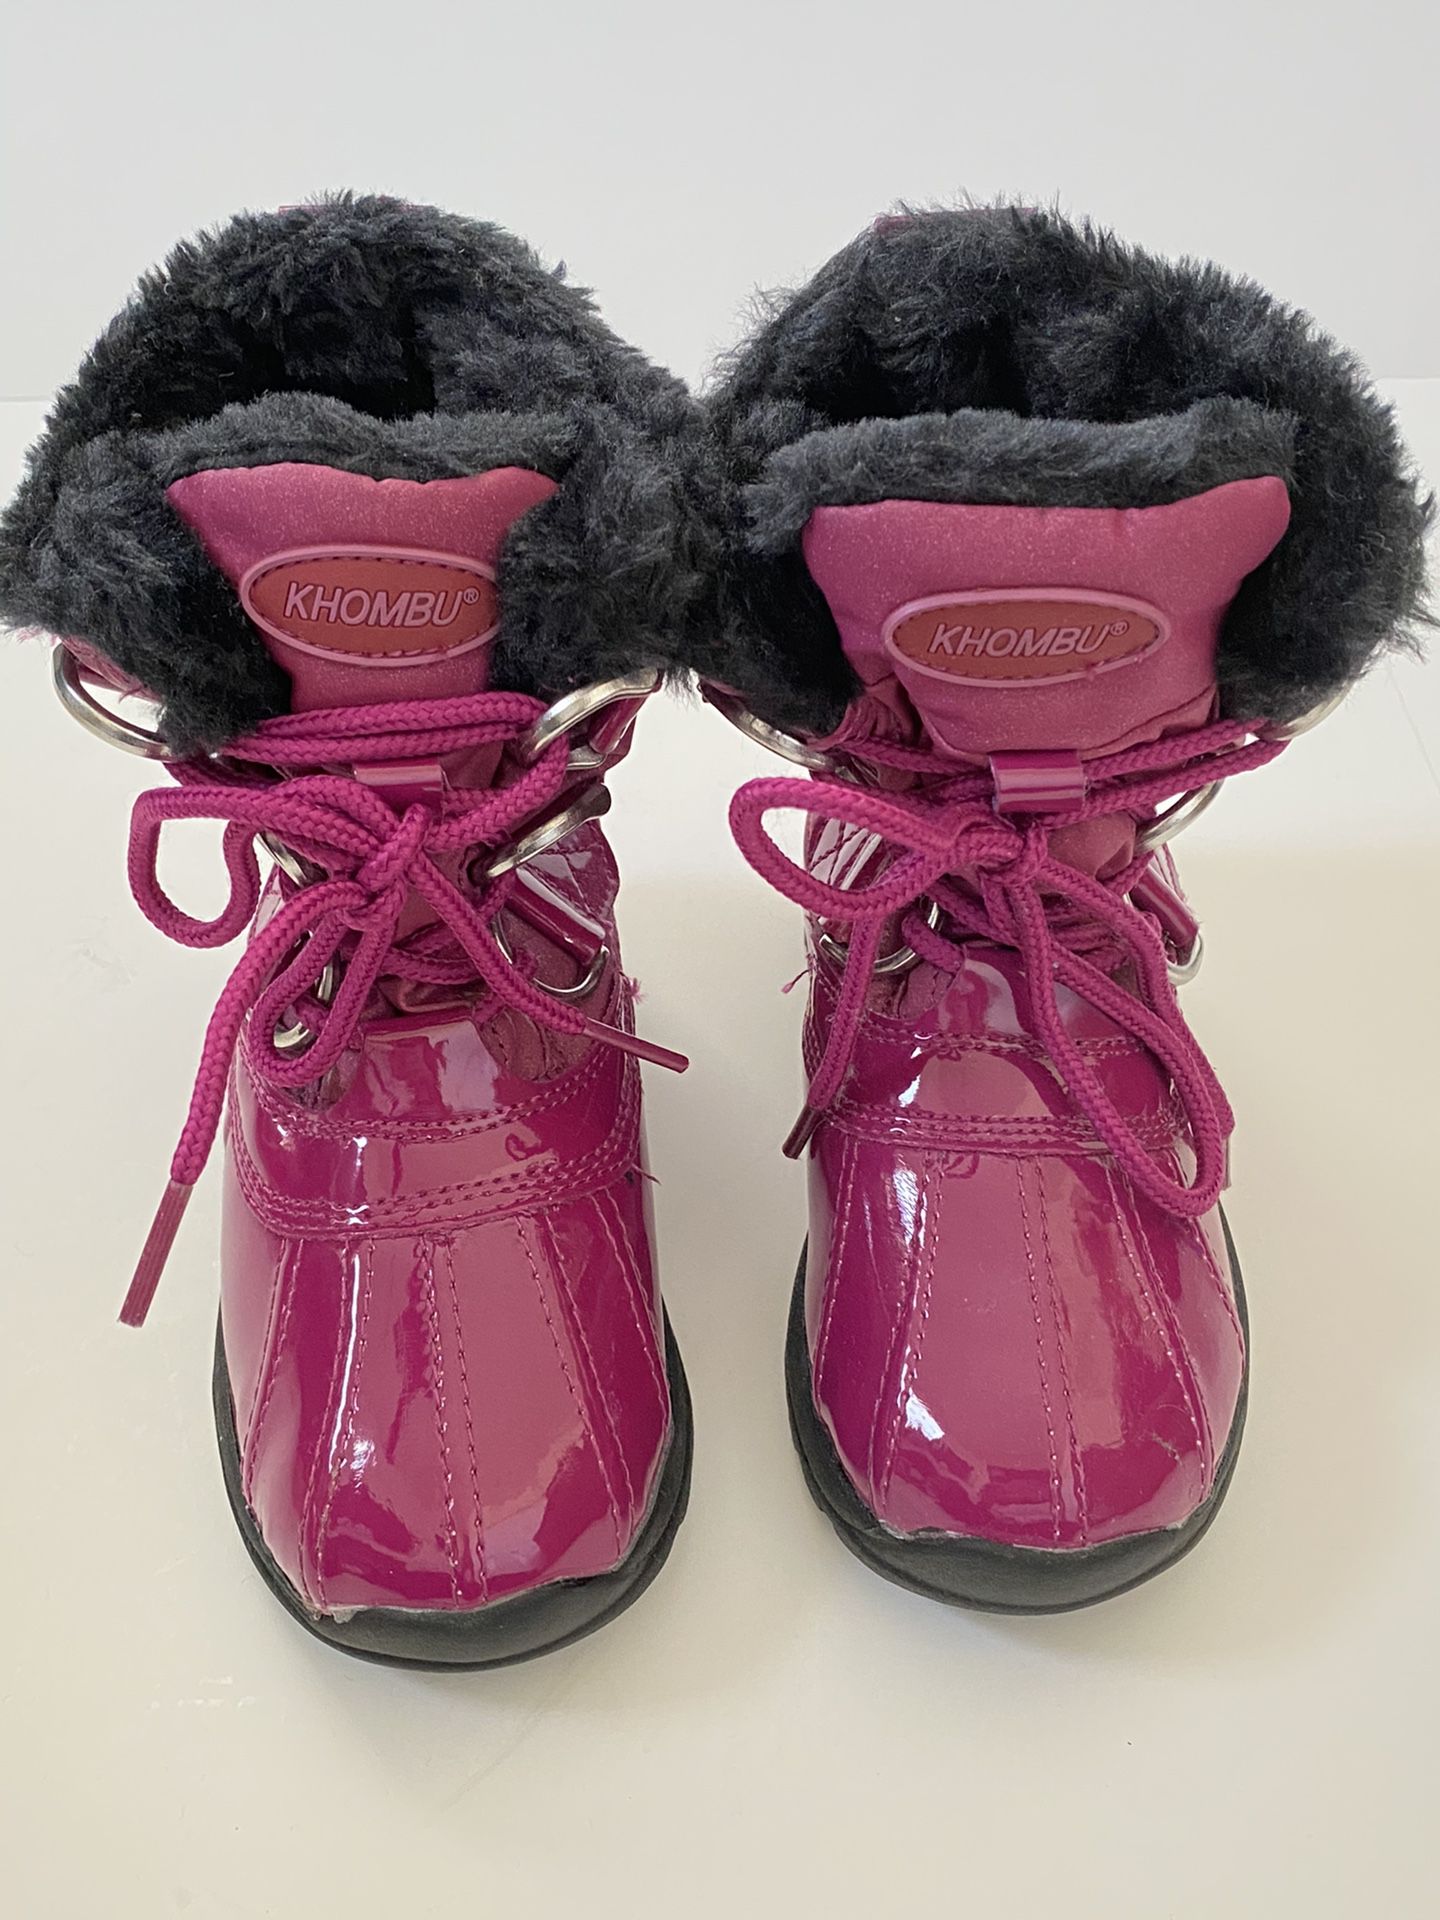 Brand New Lil Layla Toddler Snow Boots with Faux Fur Lining